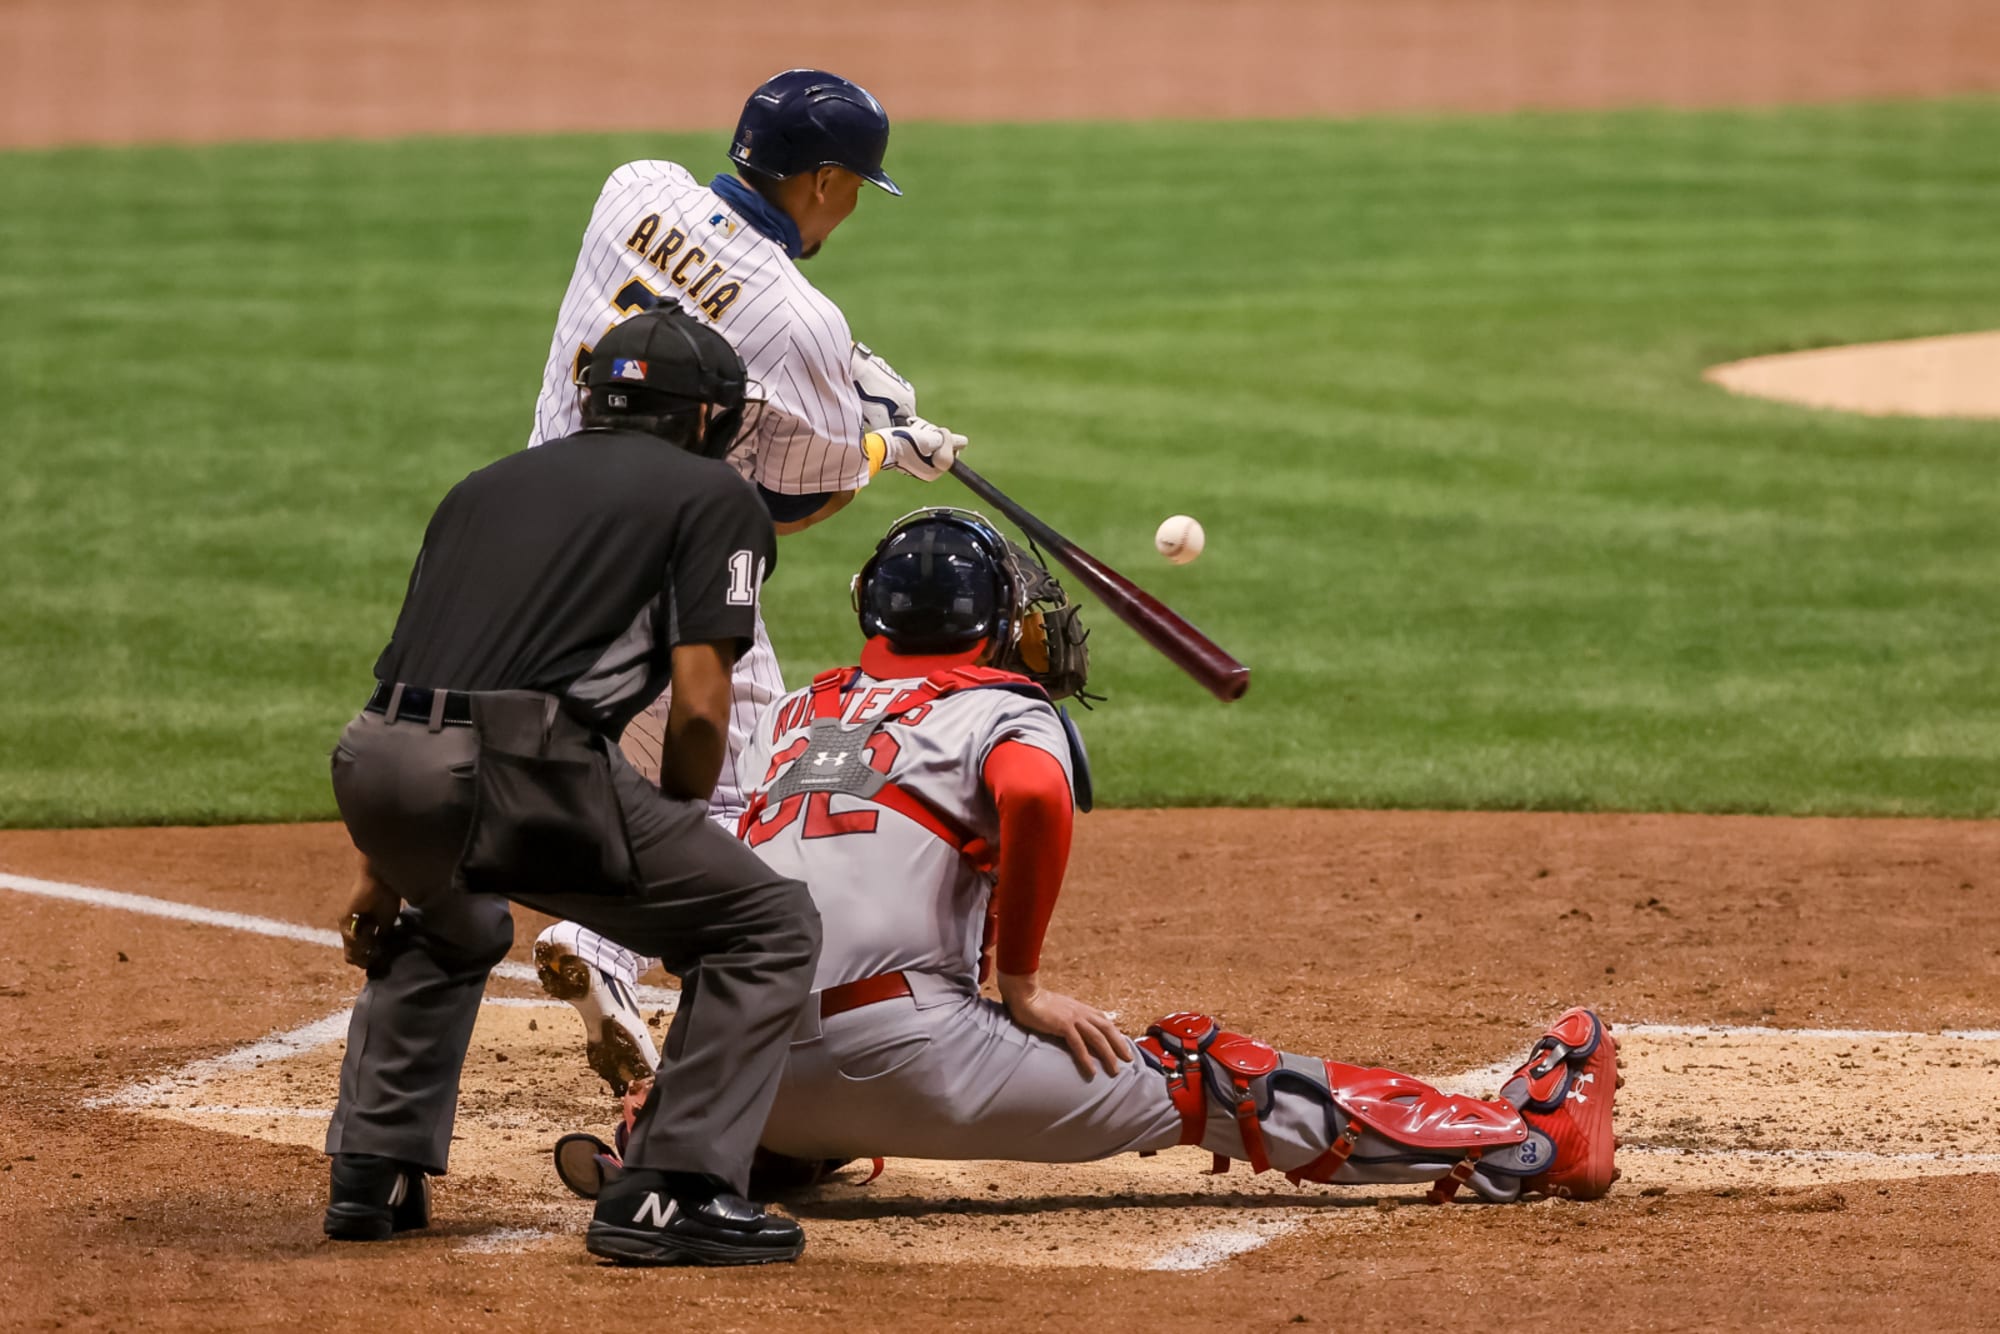 The weekend's critical series: Milwaukee Brewers vs St. Louis Cardinals